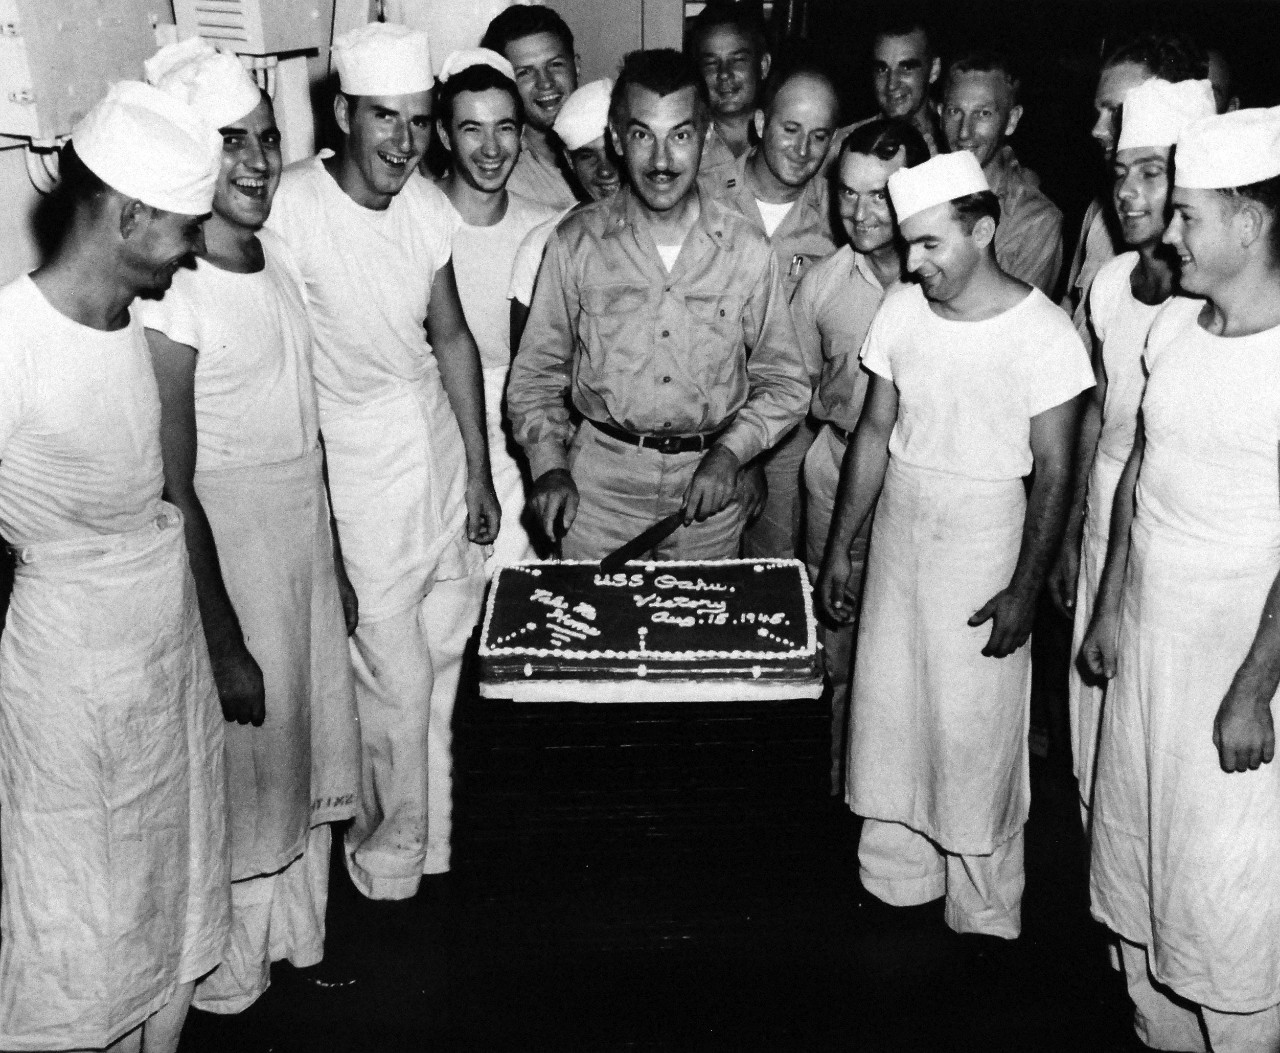 80-G-332797:   V-J Day, August 15, 1945.    USS Oahu (ARG-5), Commanding Officer, Commander A.M. Loker cuts cake in honor of the surrender at Eniwetok, Atoll, Marshall Islands, August 15, 1945. Decommissioned in 1947, she was transferred to the Maritime Administration in July 1963.    Official U.S. Navy photograph, now in the collections of the National Archives. (2015/11/17).   Note, original photograph is extremely curved.  